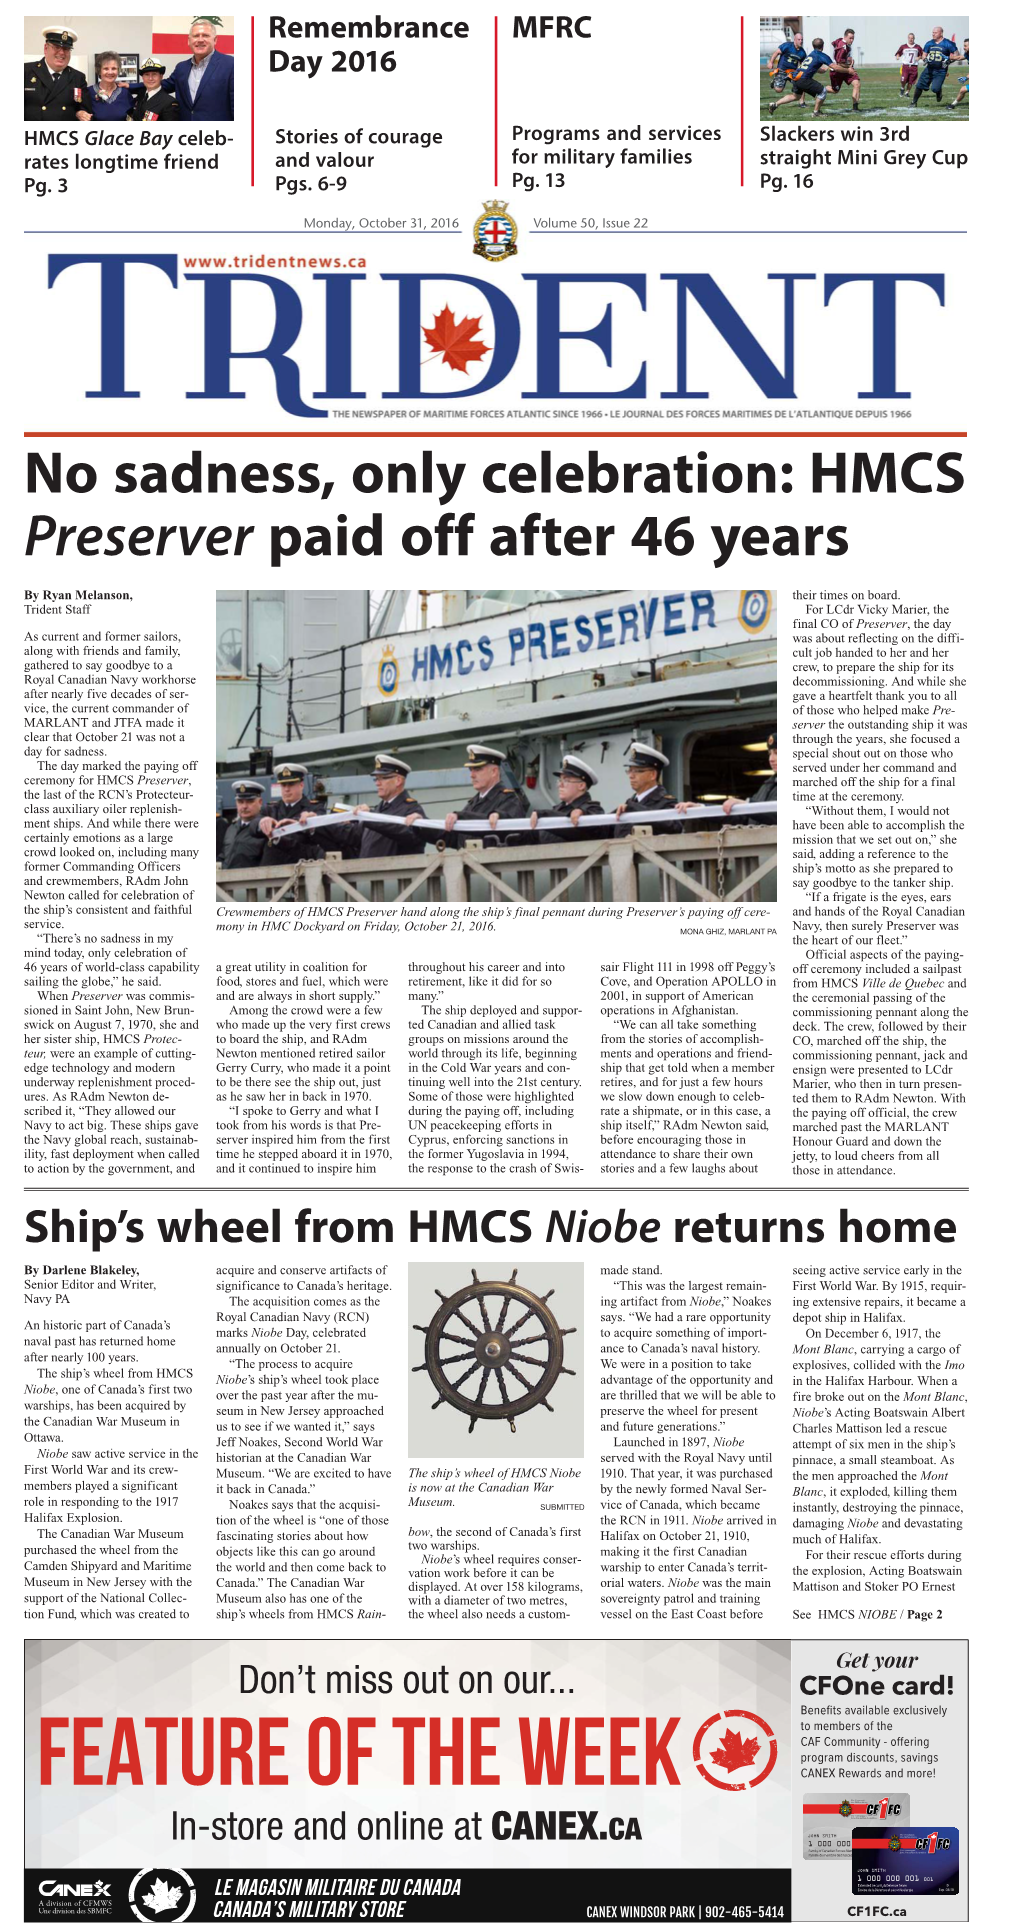 No Sadness, Only Celebration: HMCS Preserver Paid Off After 46 Years